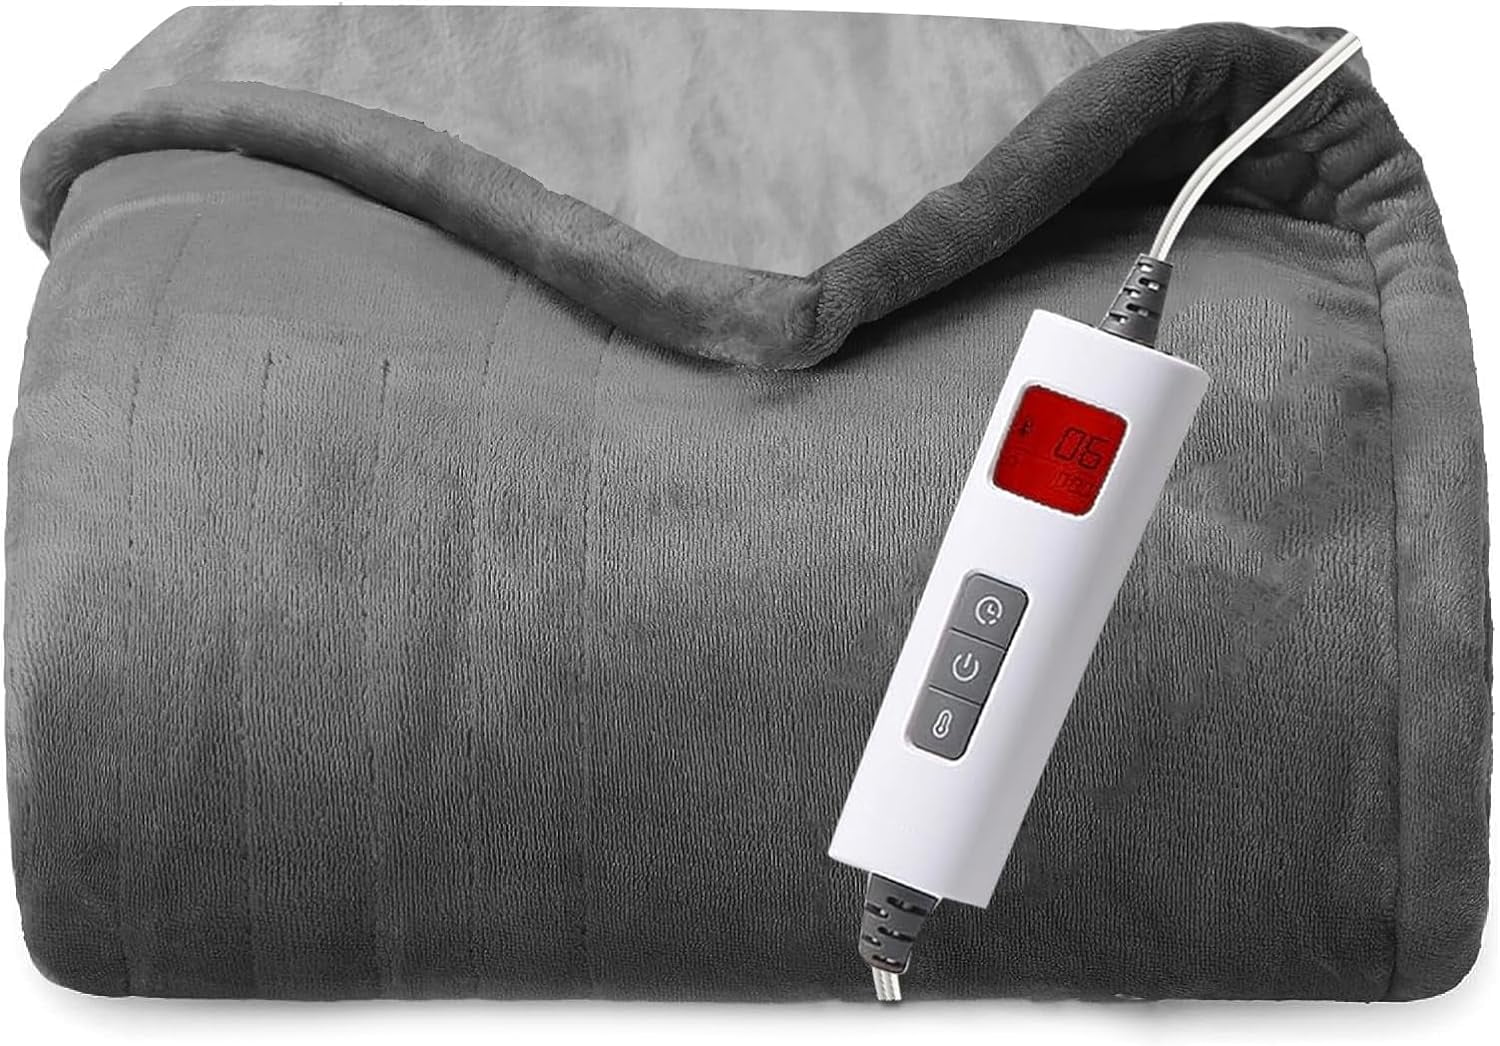 USB Battery-Operated Heated Blanket at Zonli